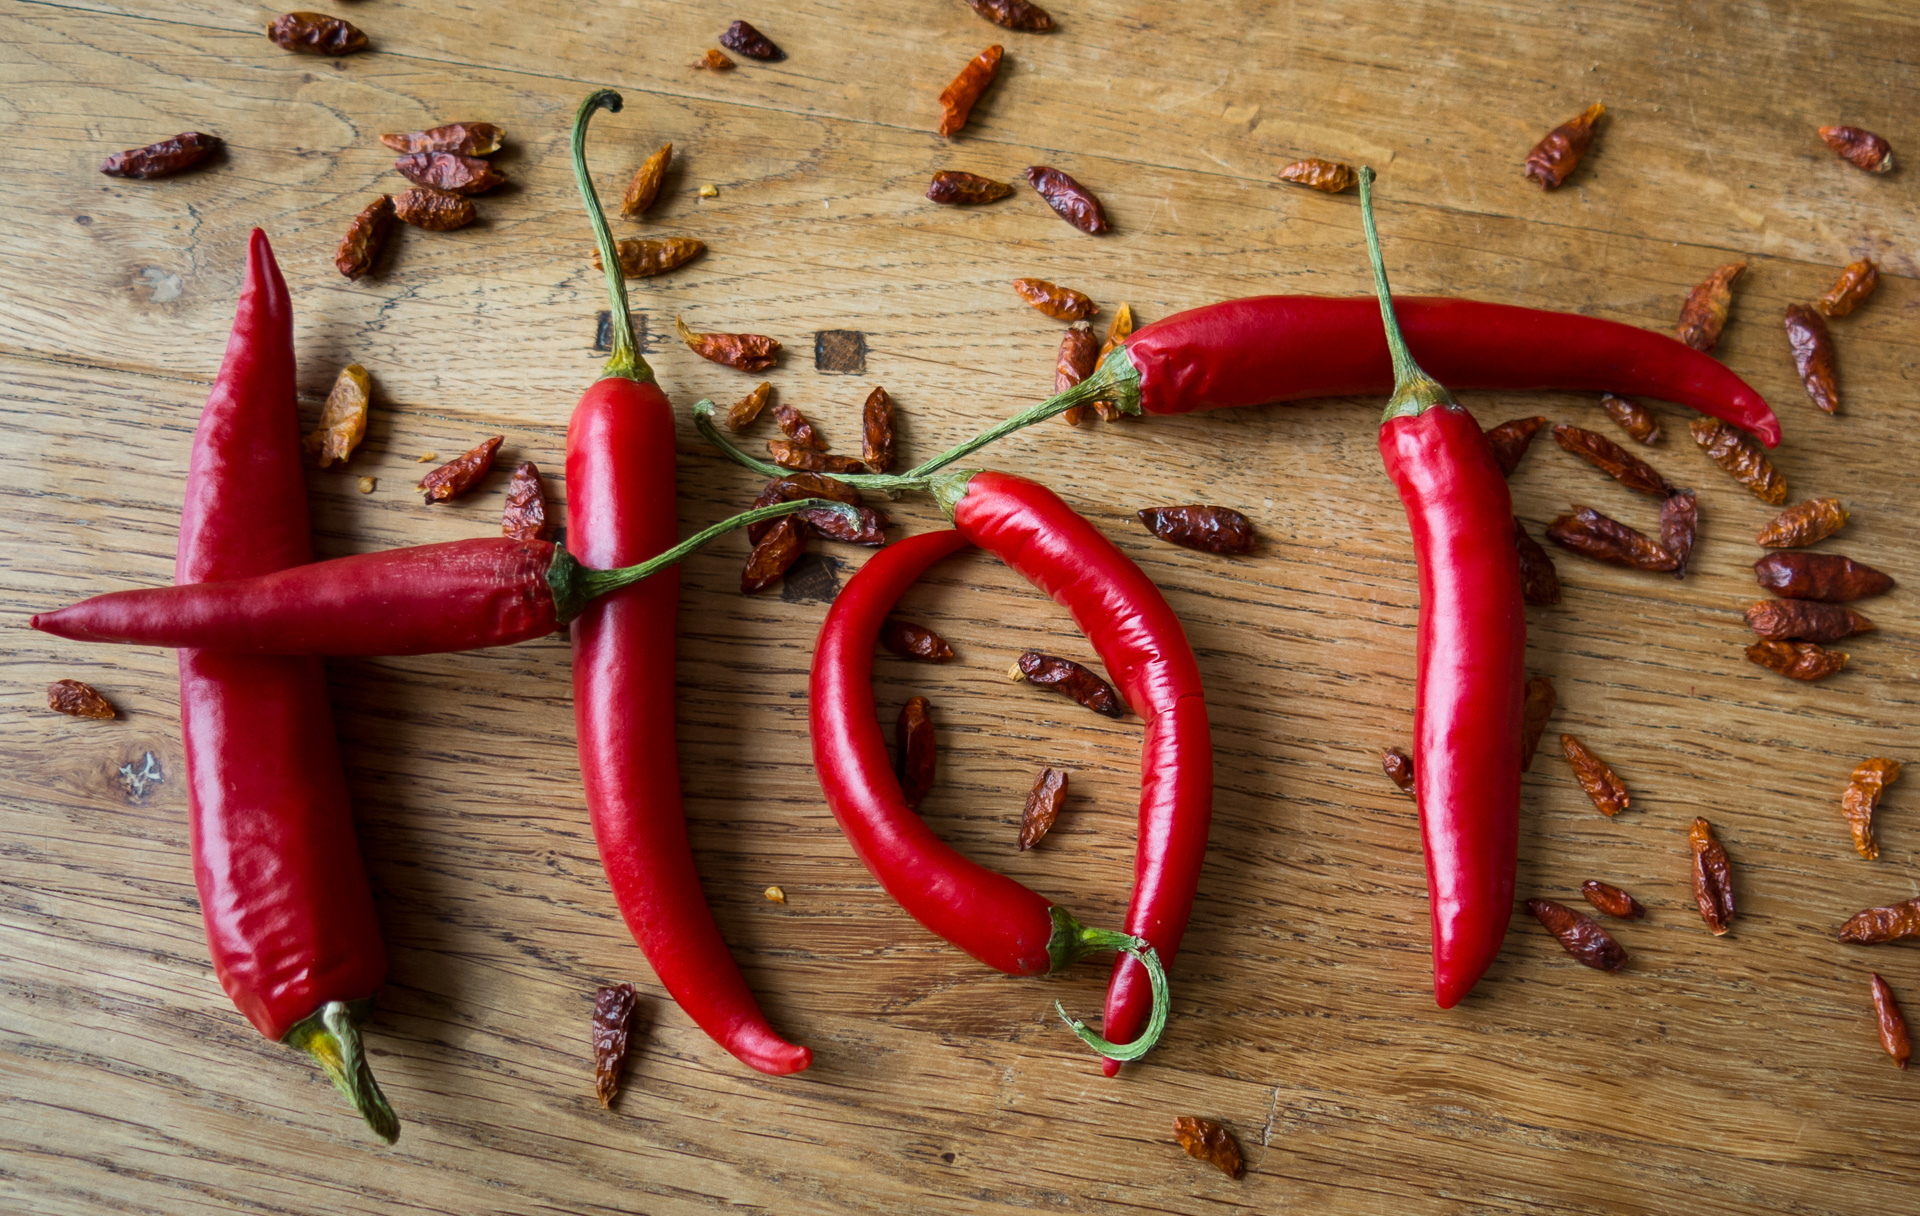 Hot peppers can help fight off depression